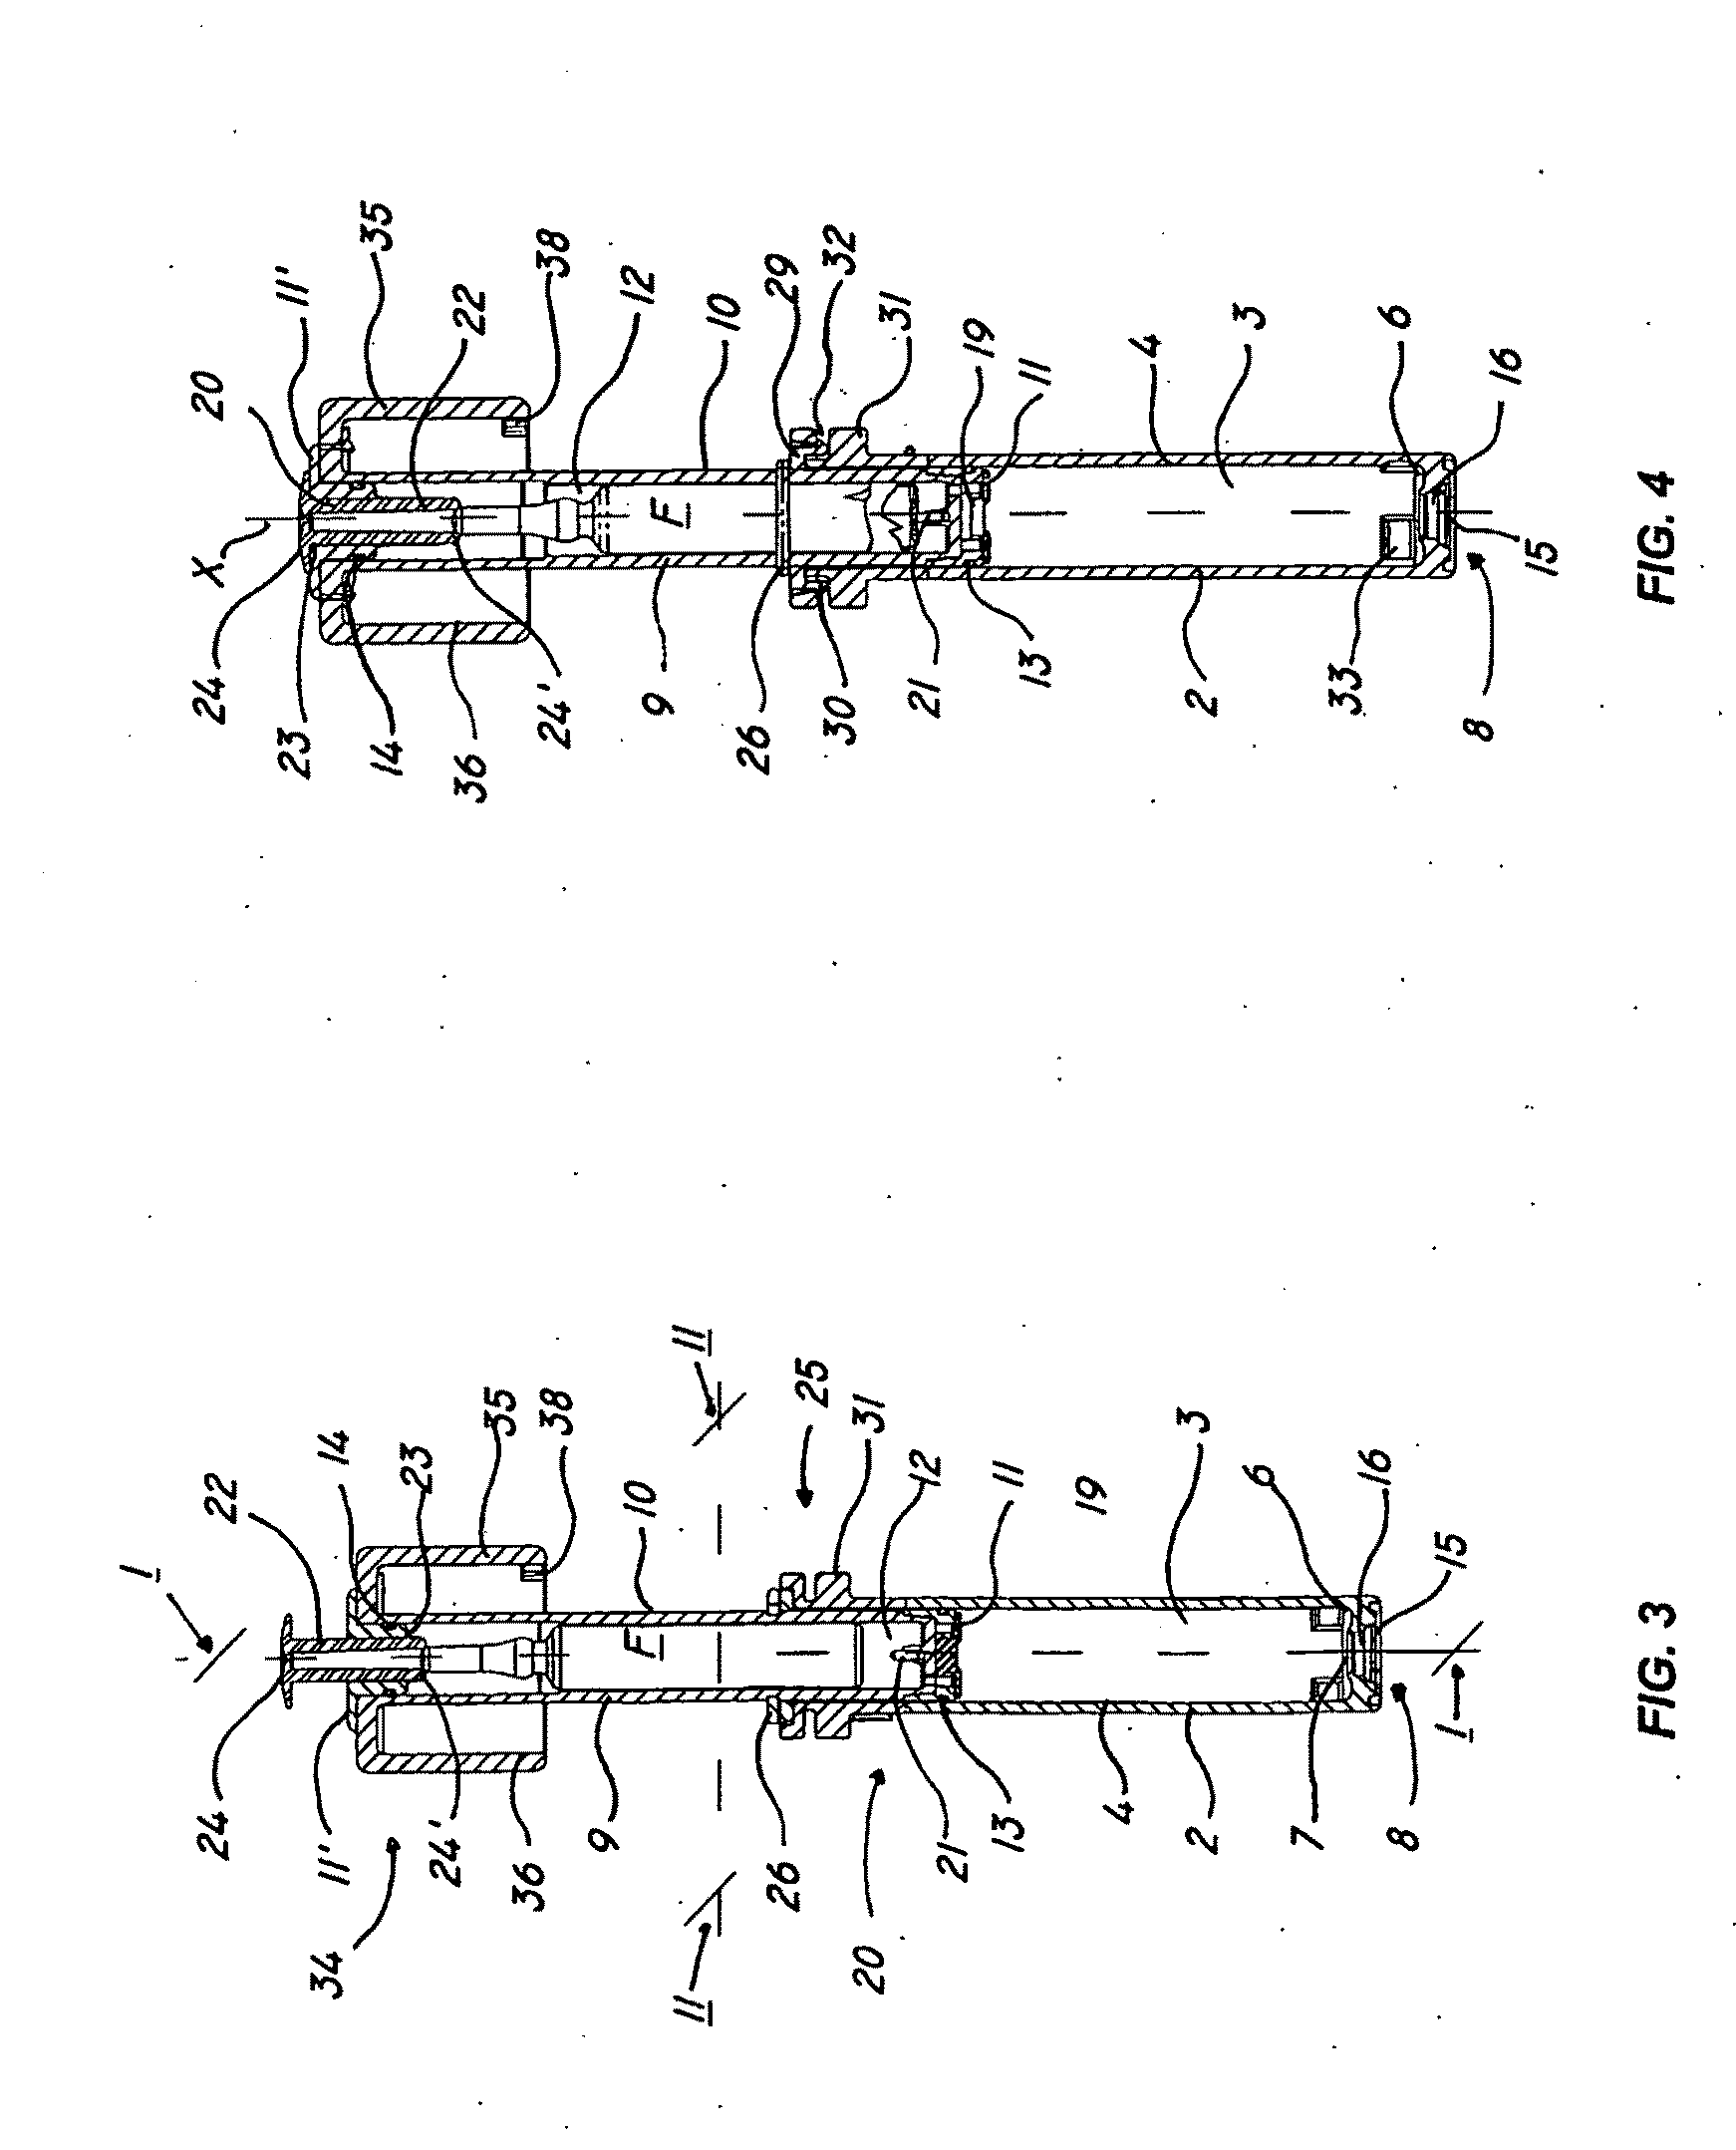 Cartridge For Storage and Delivery of a Two-Phase Compound